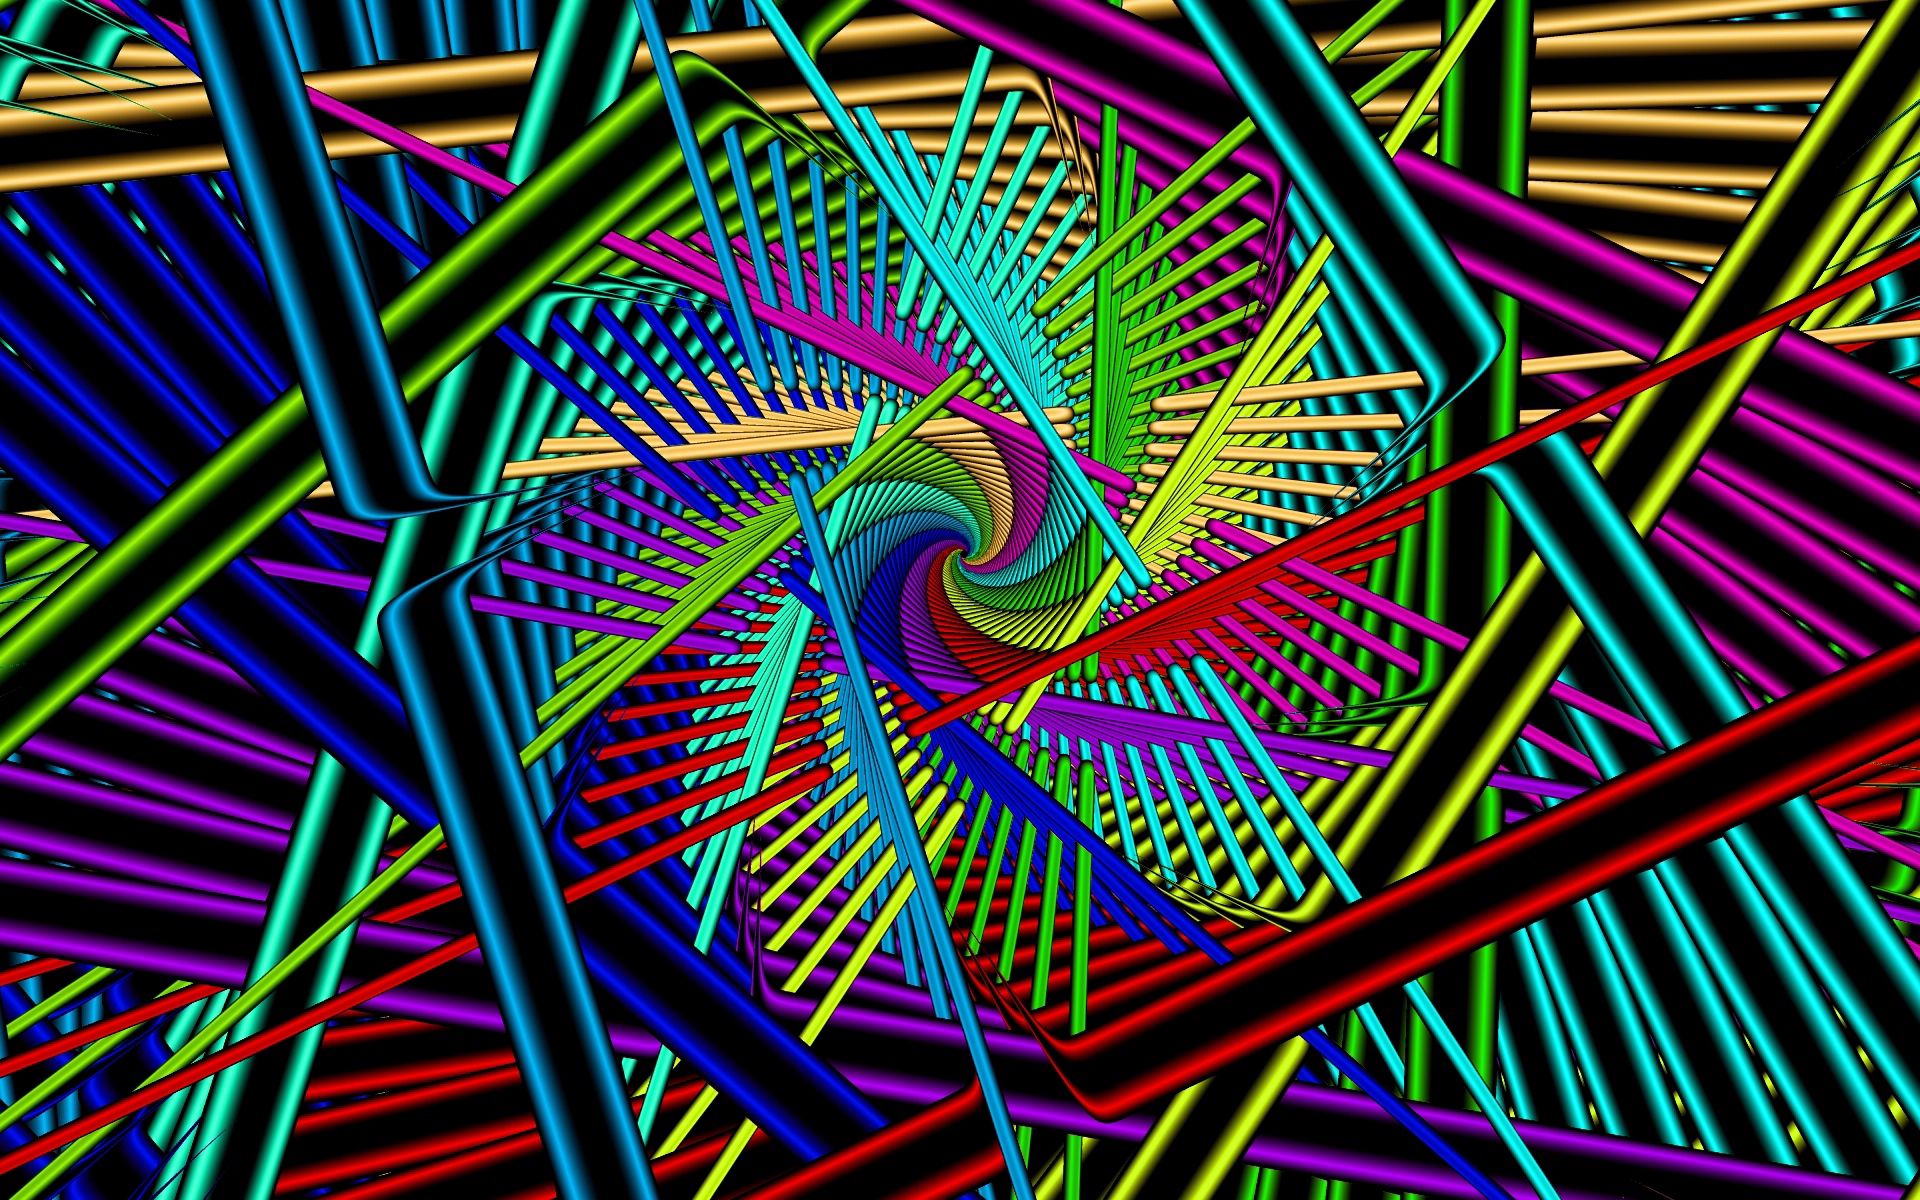 motley, abstract, bright, multicolored, rotation